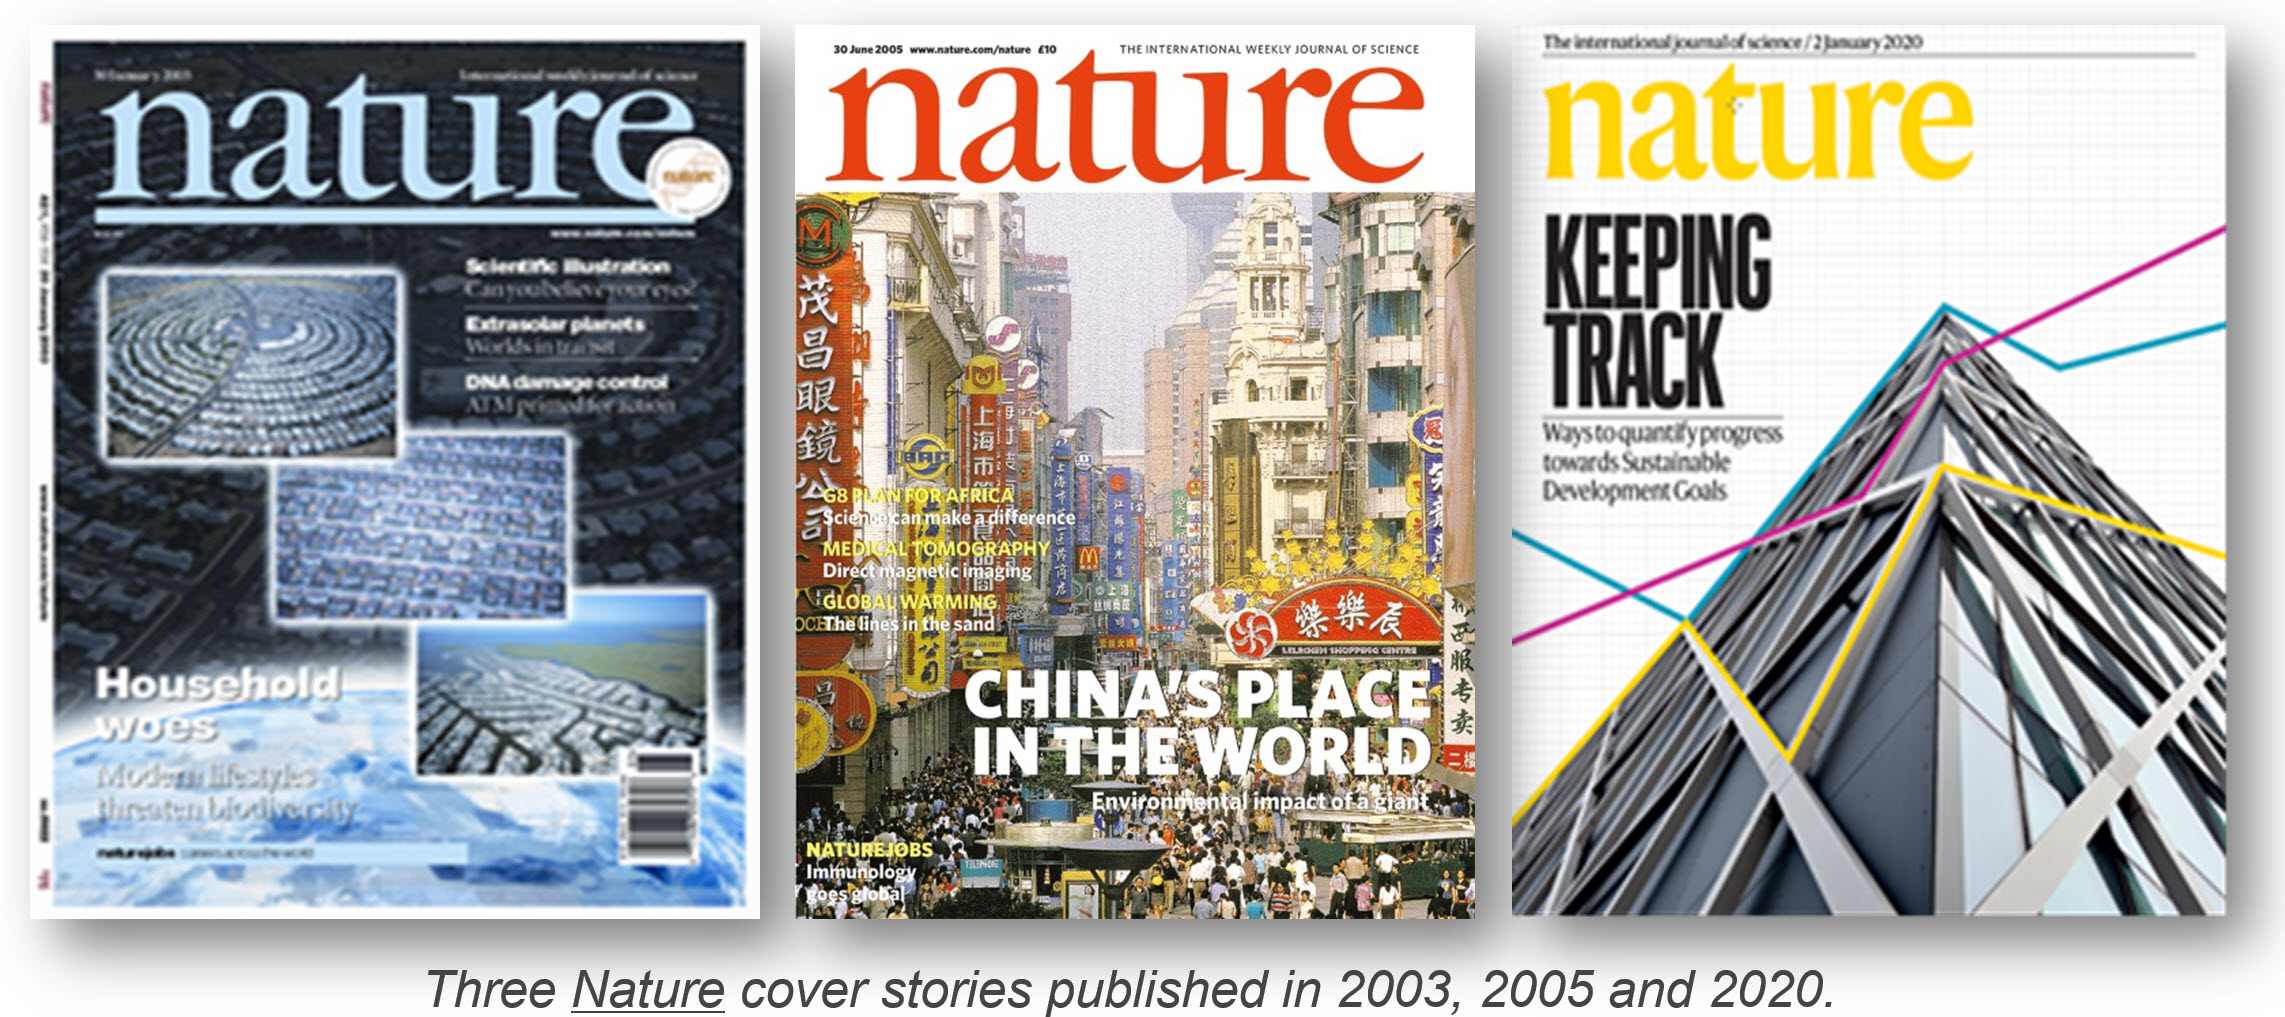 Nature covers